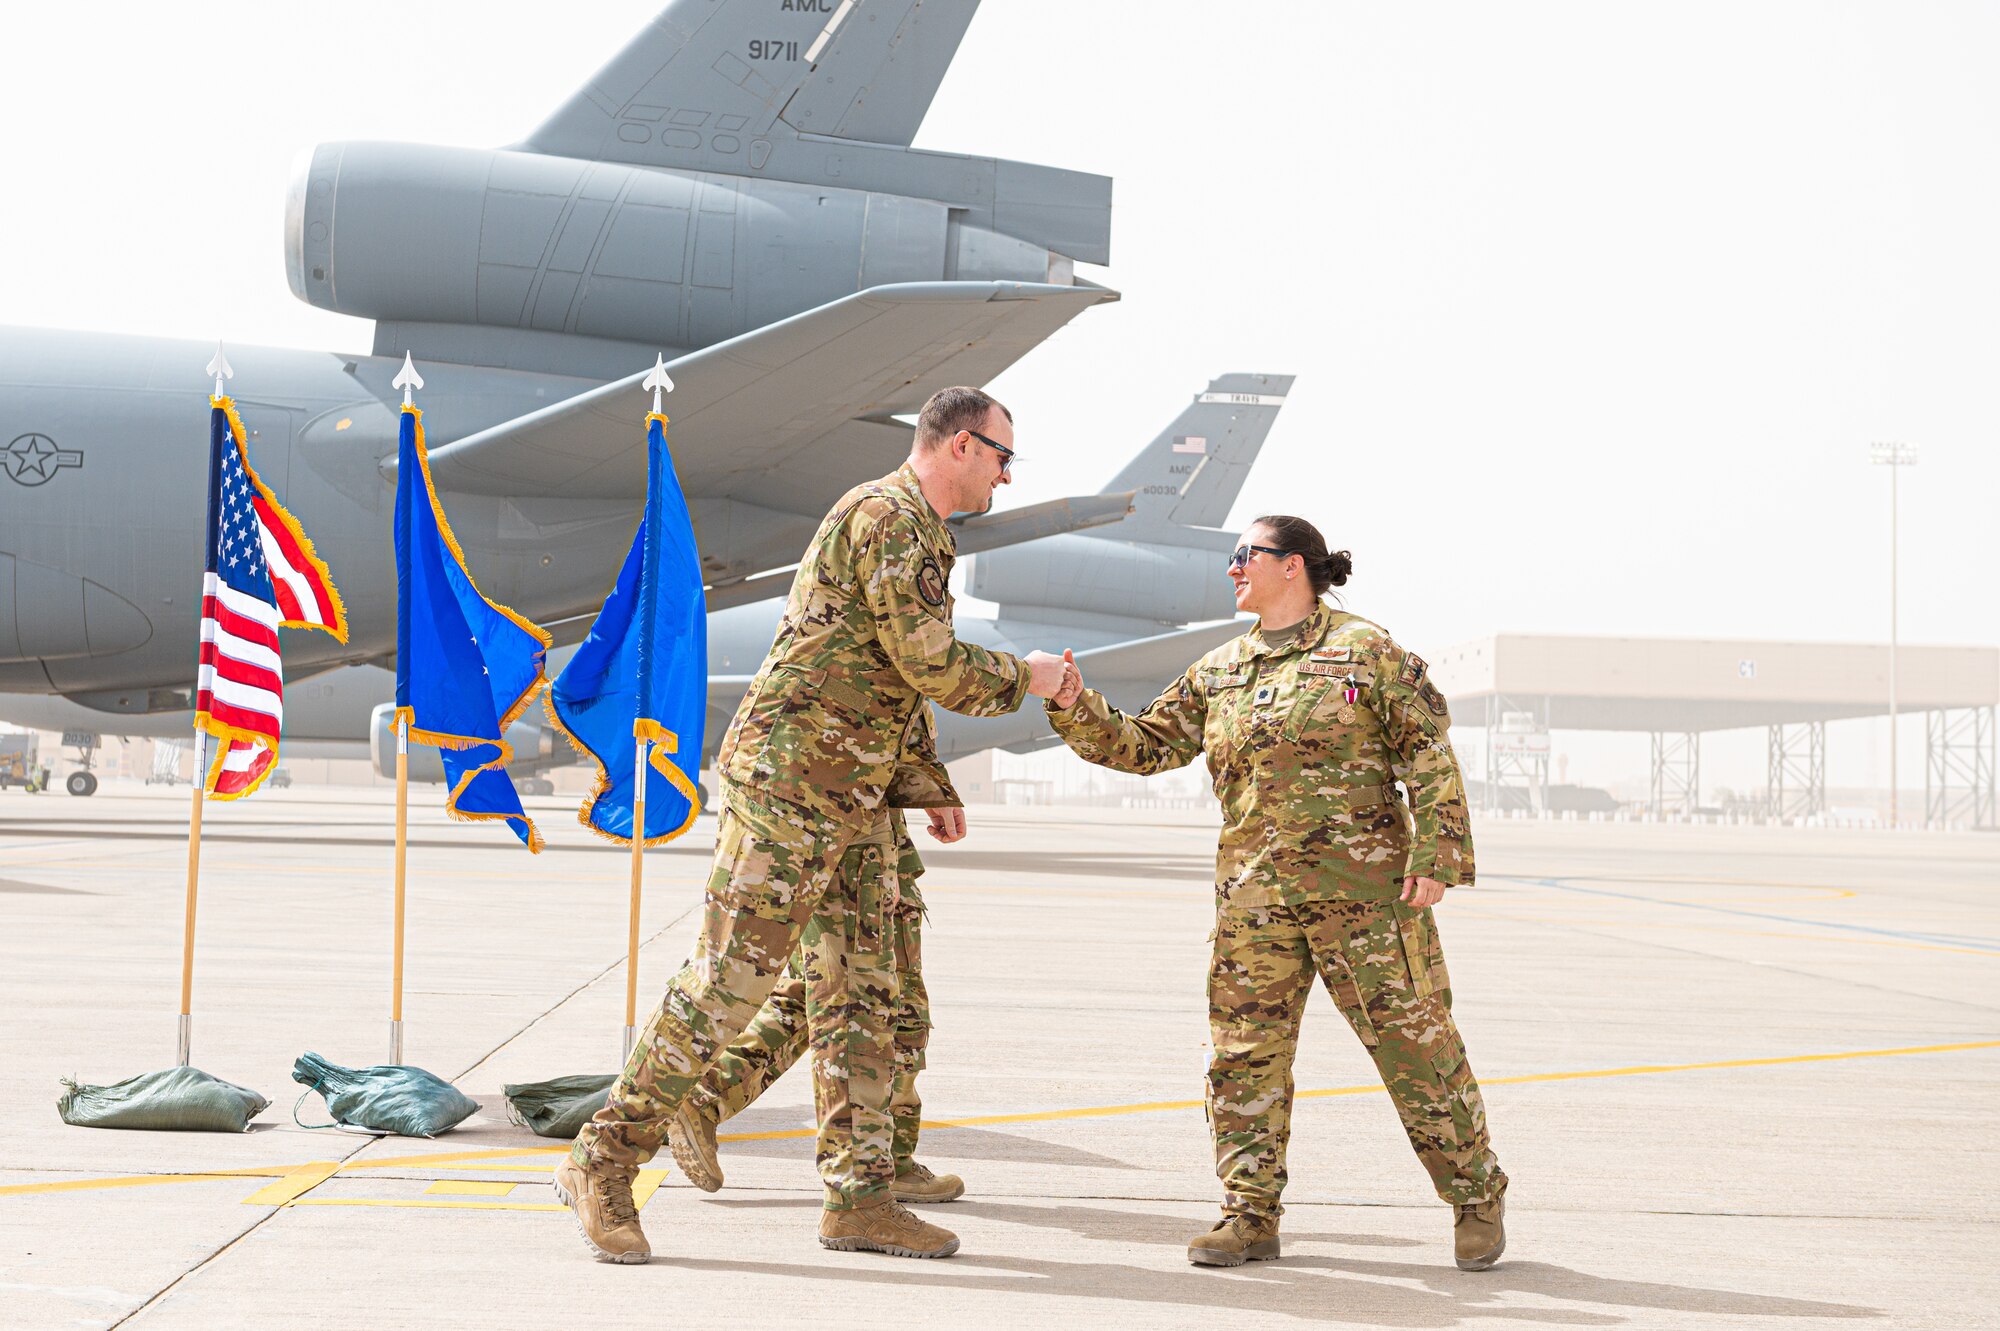 KC-10 squadron receive new commander at Prince Sultan